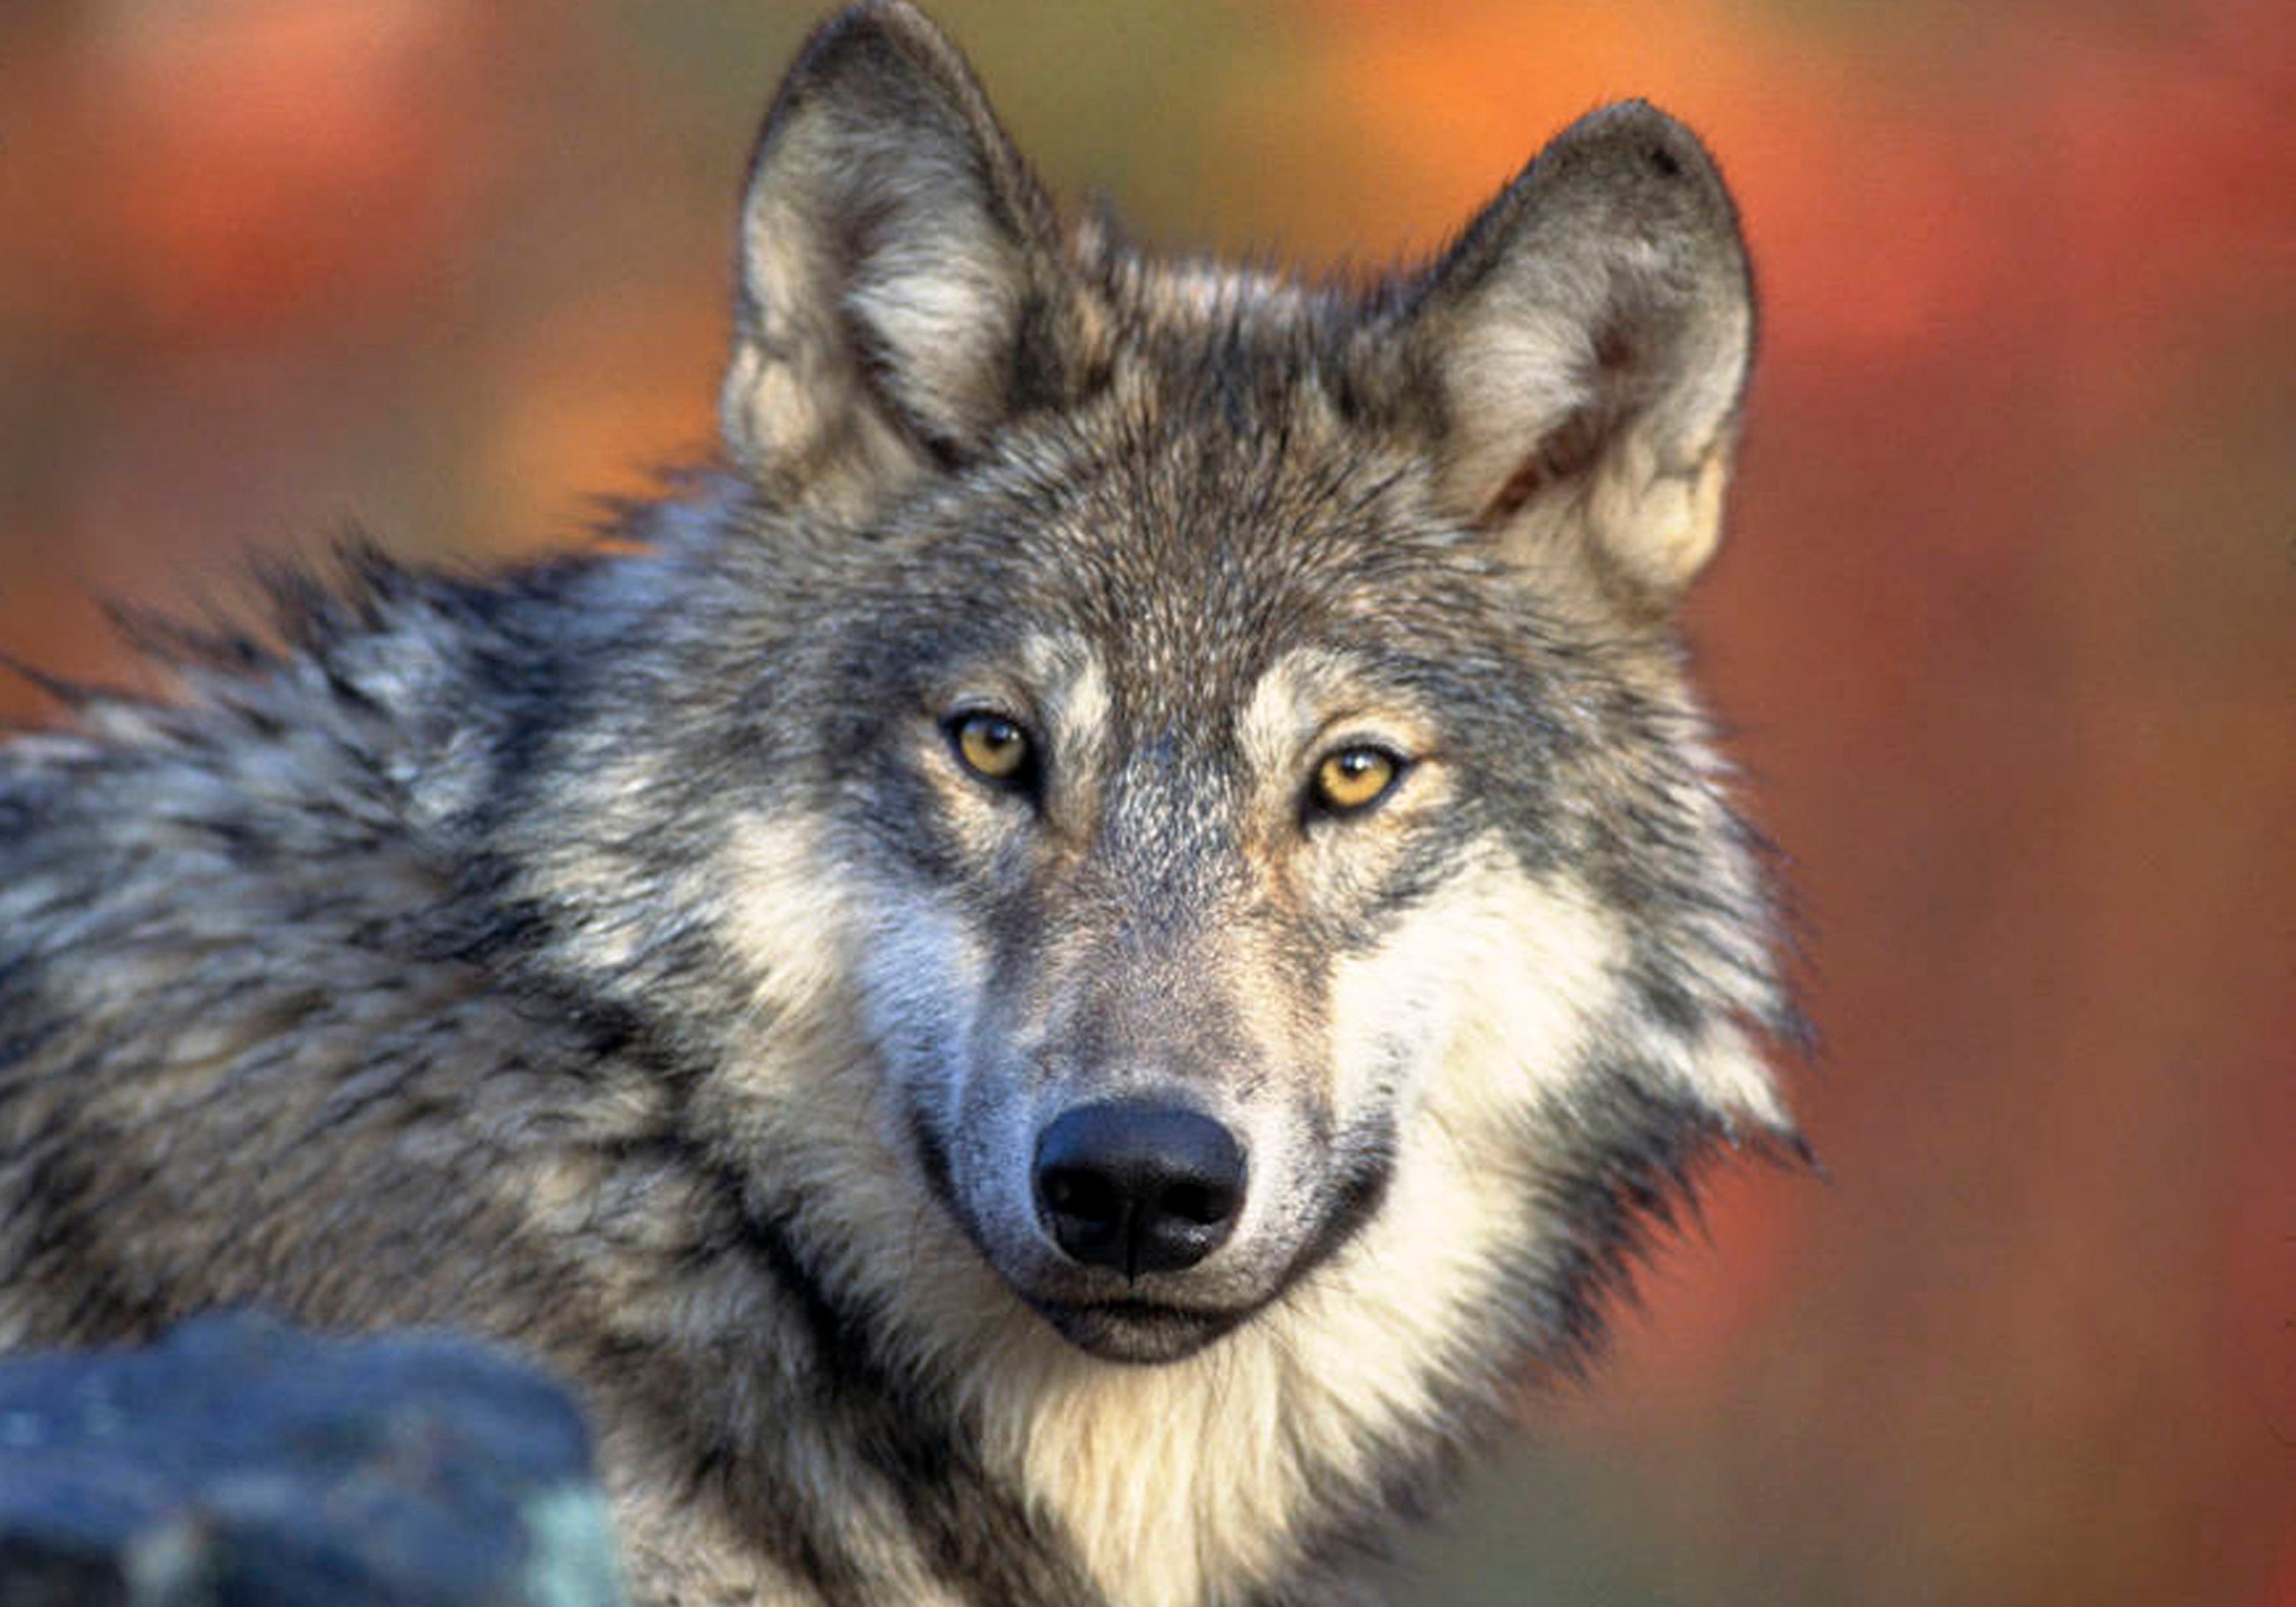 New legislation makes it easier to kill wolves in several Western states